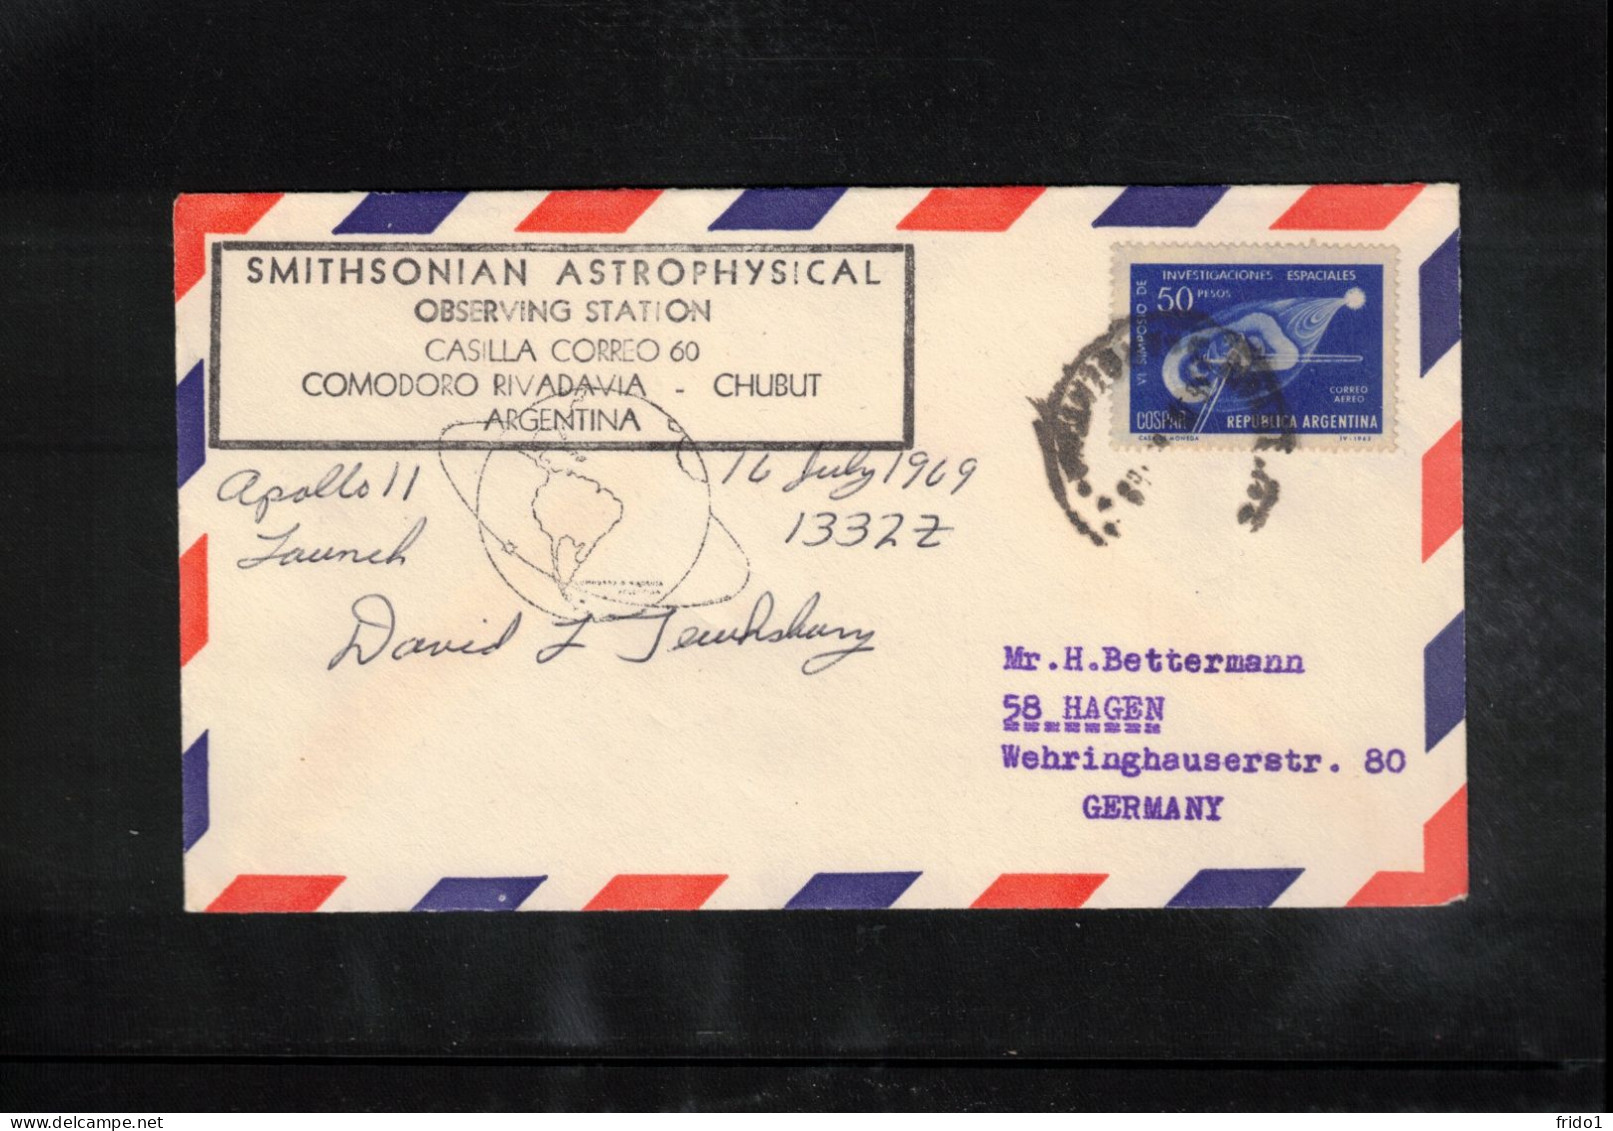 USA 1969 Space / Weltraum - Apollo XI - Smithsonian Astrophysical Observation Station Argentina Interesting Cover - Etats-Unis